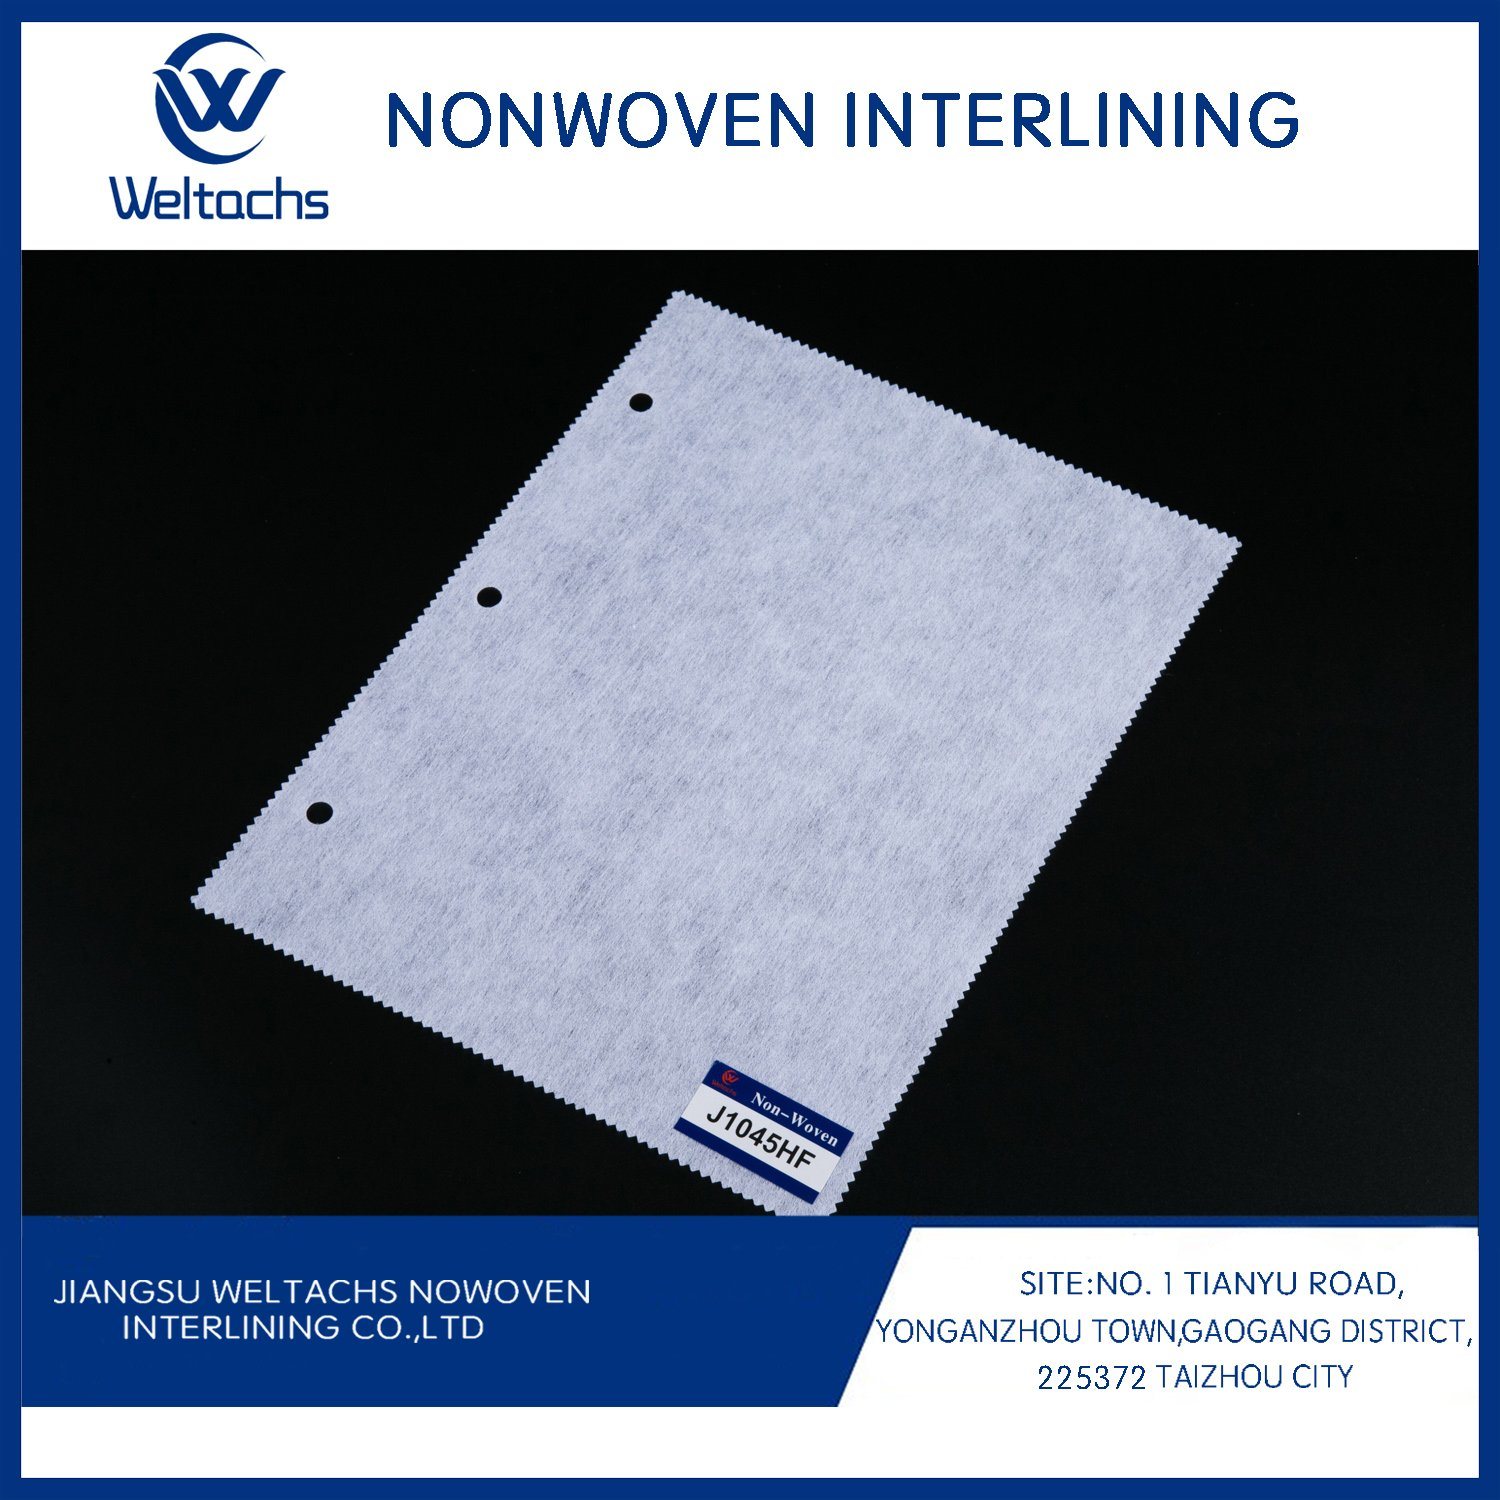 HDPE Non Woven Lining for Best Quality 1035 100 Polyester Nonwoven Interfacing for Cheaper Price Non-Woven Interlining Fabric